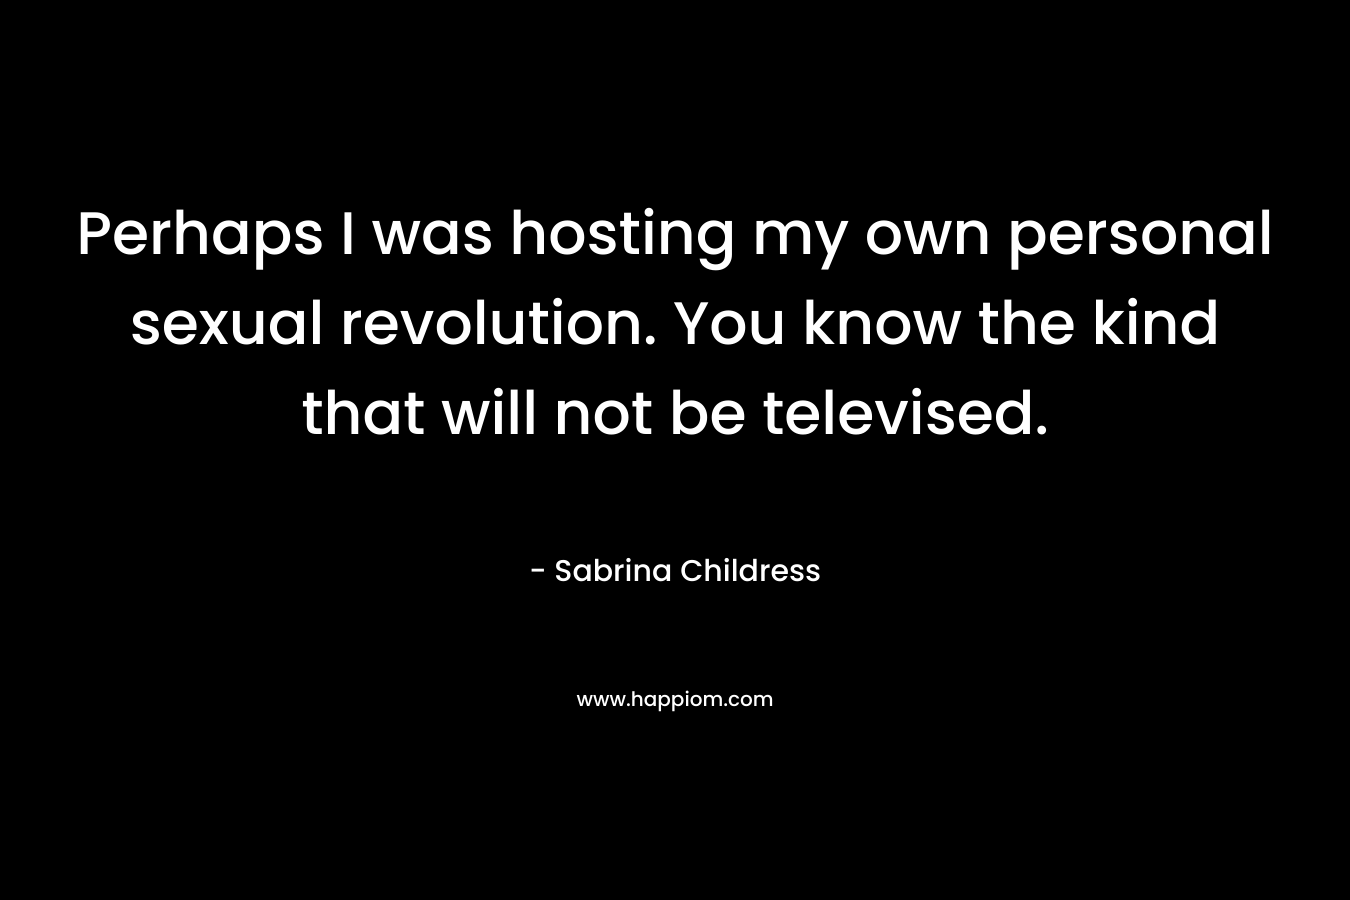 Perhaps I was hosting my own personal sexual revolution. You know the kind that will not be televised. – Sabrina Childress